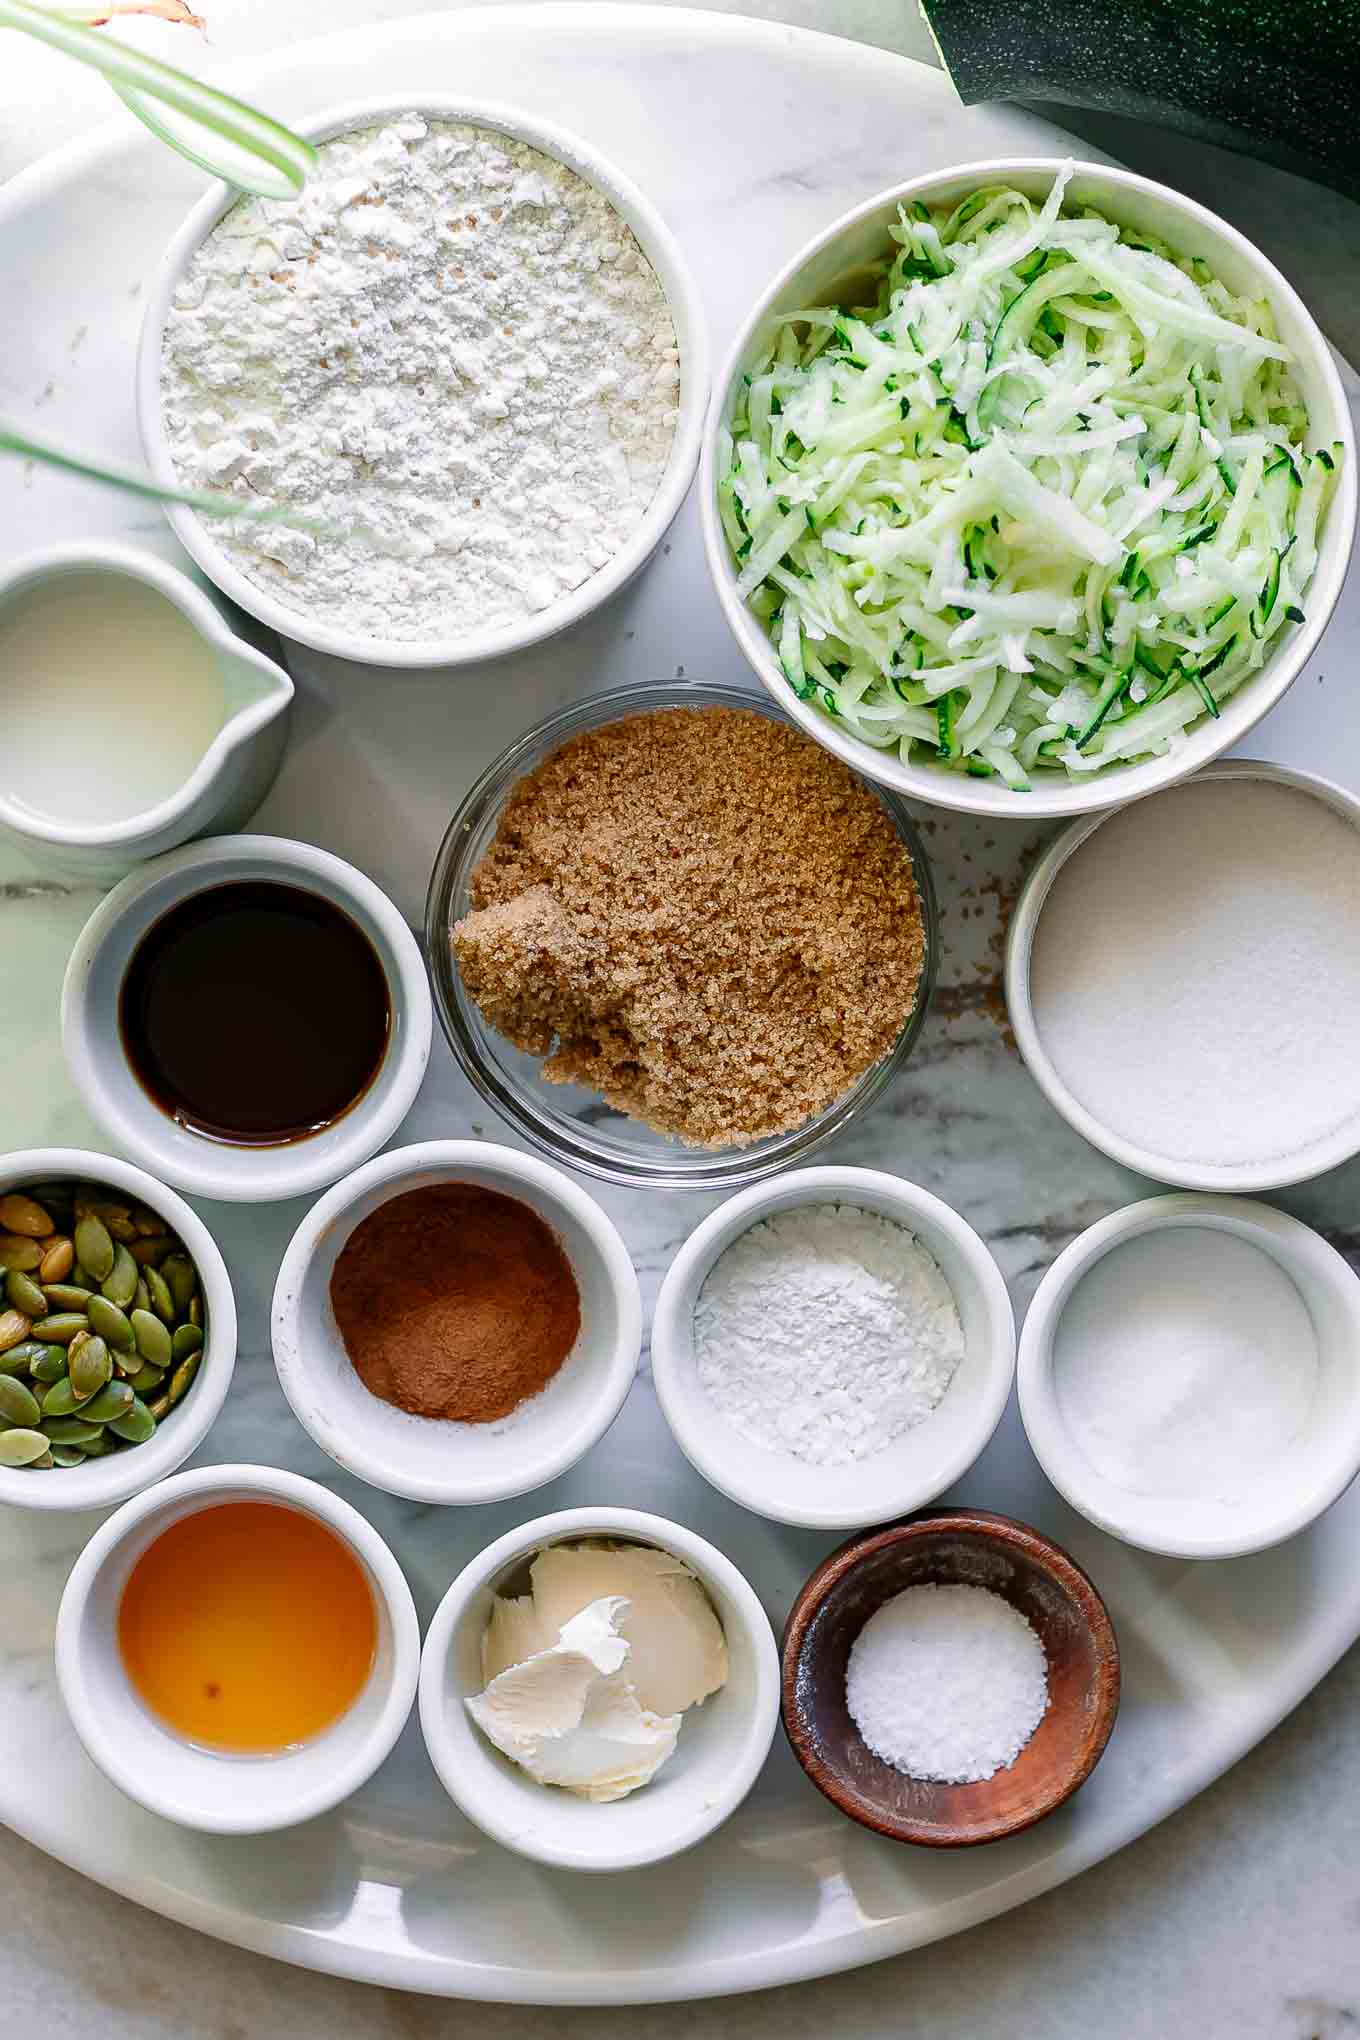 bowls of flour, sugar, shredded zucchini, and other ingredients for plant-based zucchini muffins